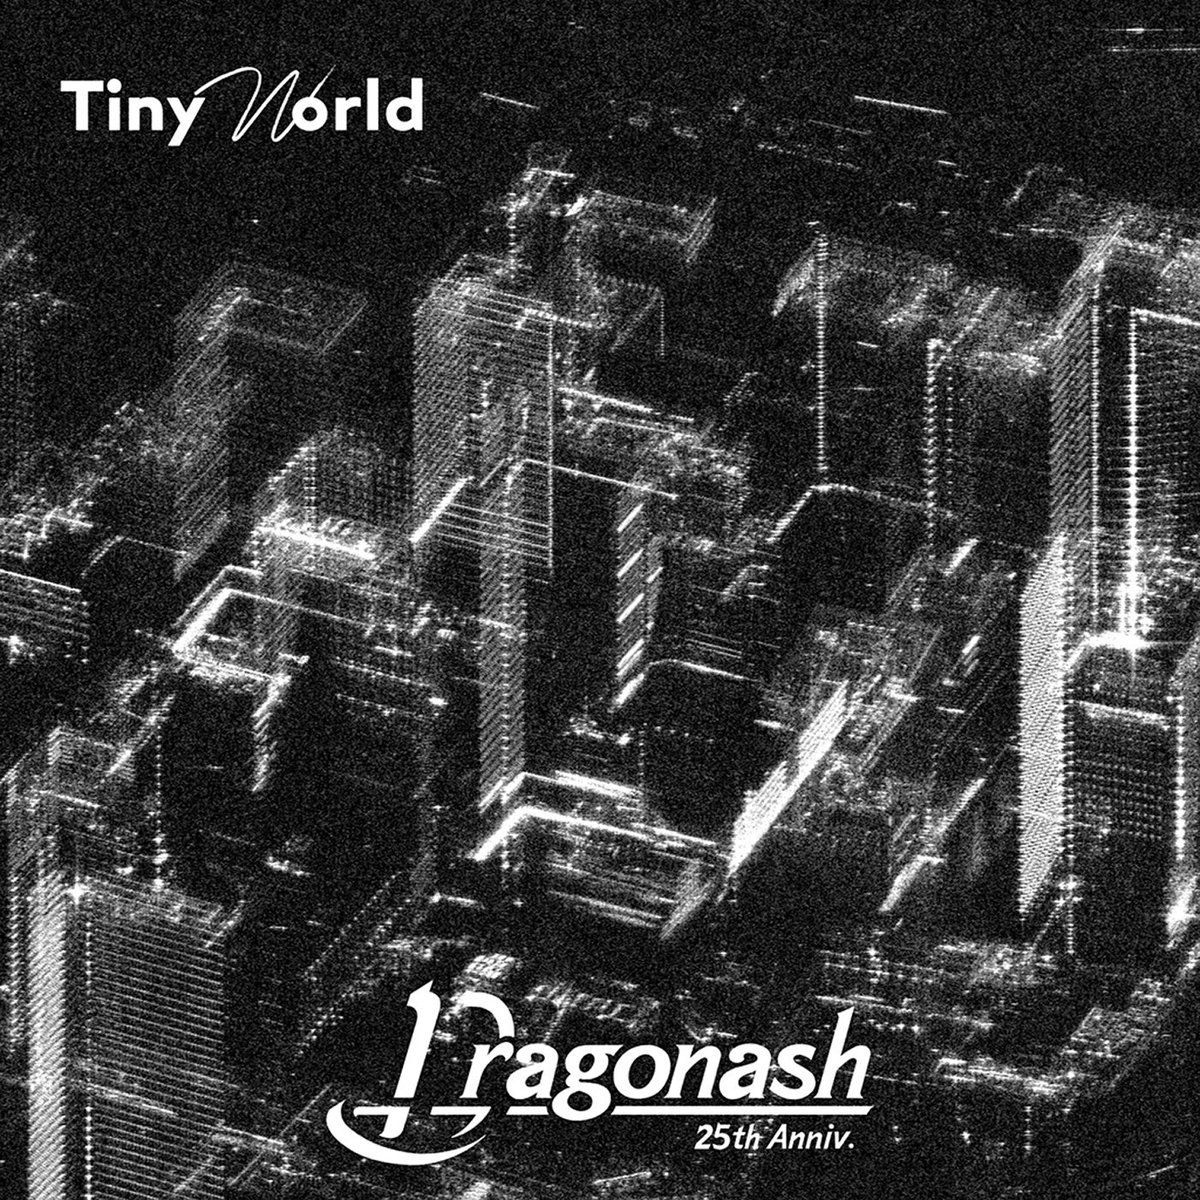 Cover art for『Dragon Ash - Tiny World』from the release『Tiny World』